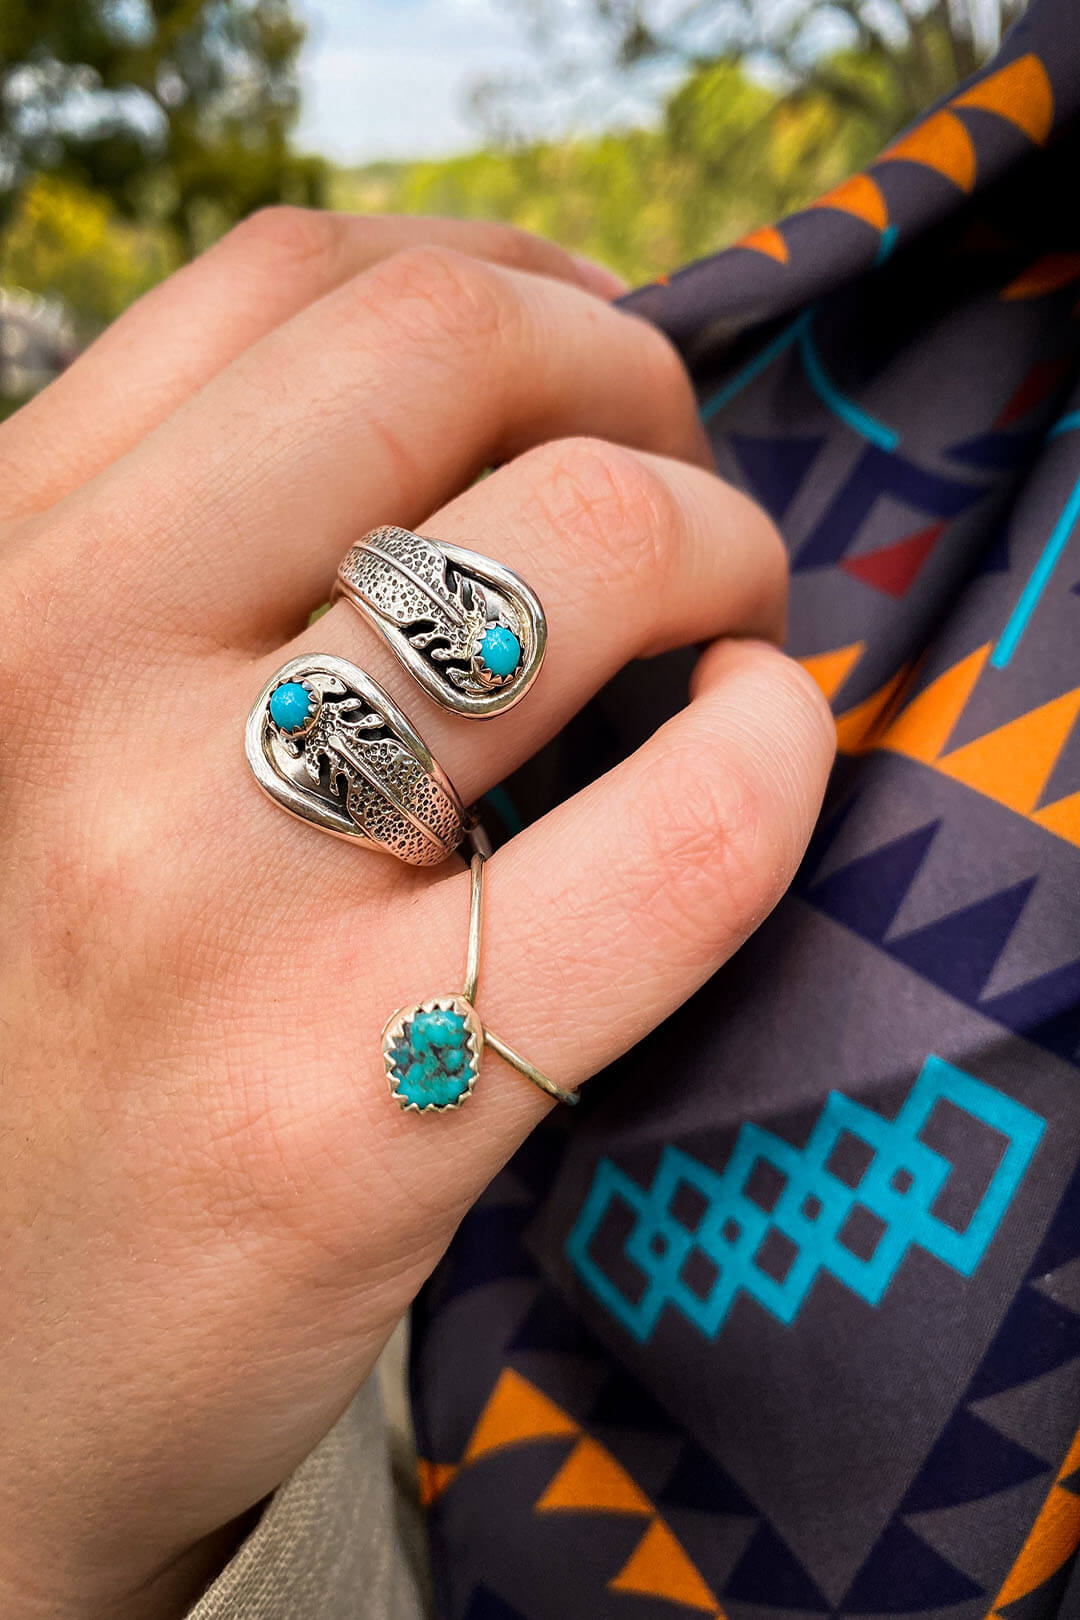 New Mexico Turquoise Stone Ring-Pick your Favorite!